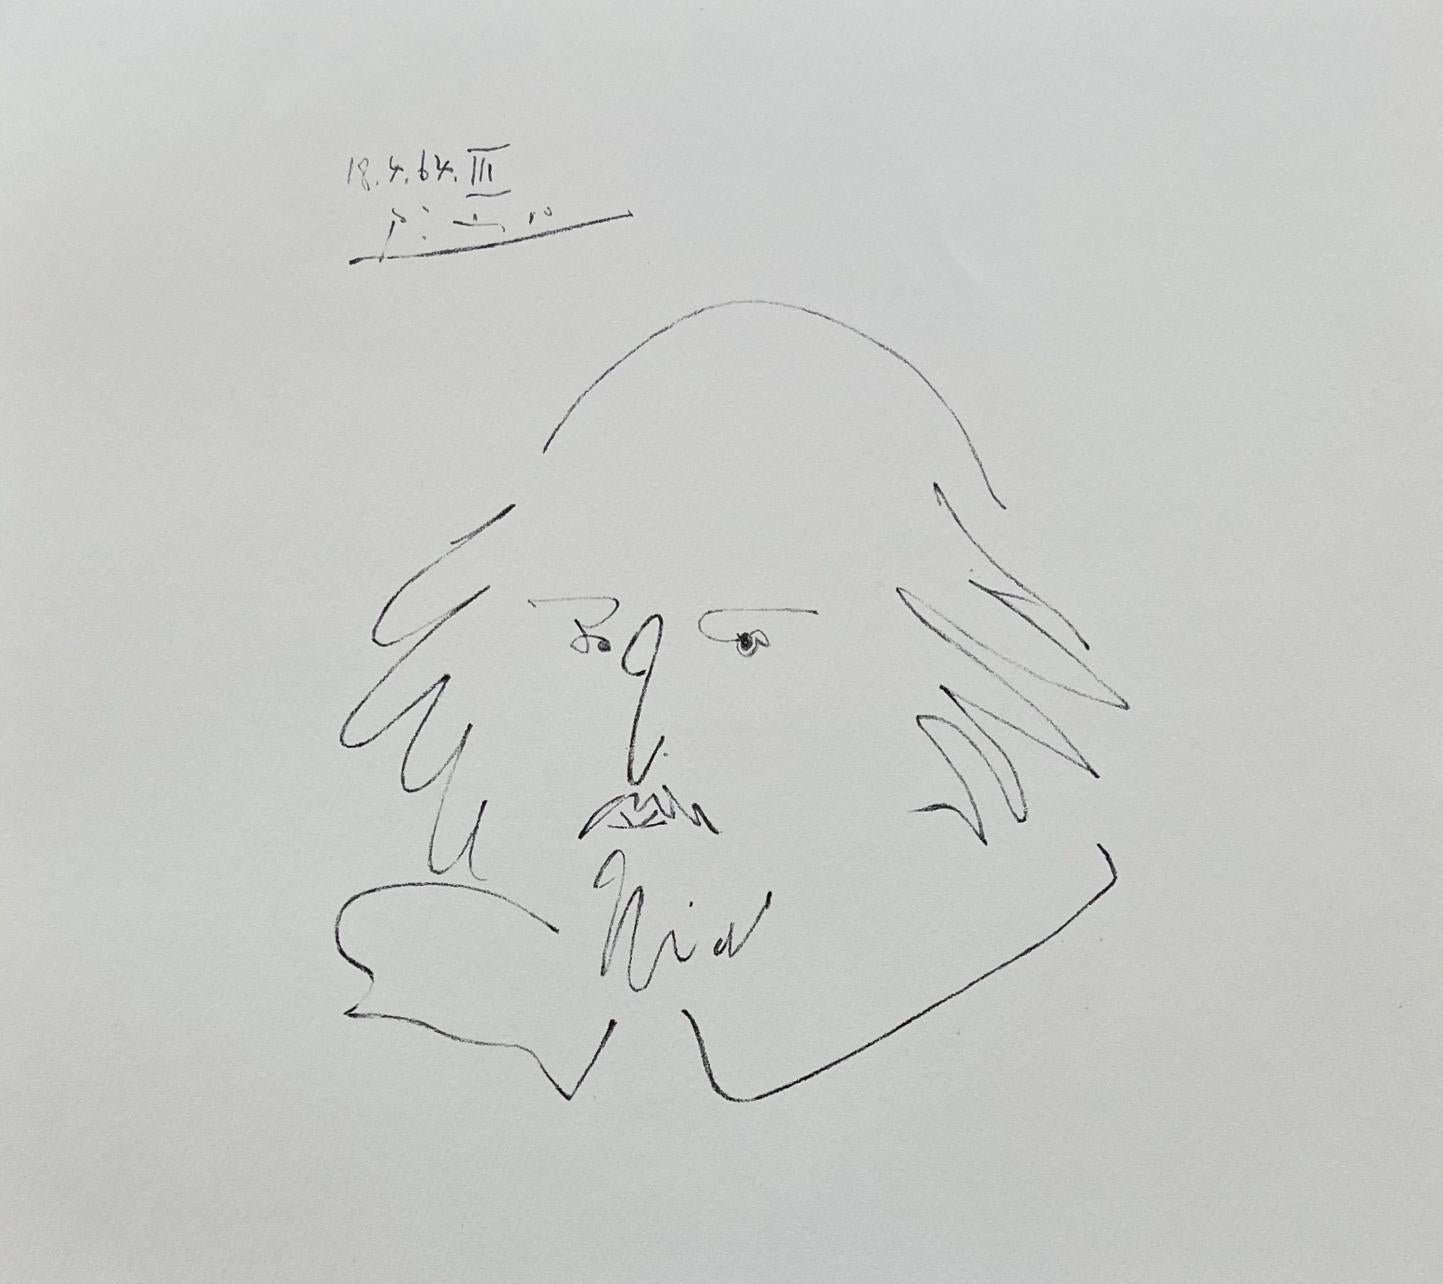 Pablo Picasso Figurative Print - Picasso, Shakespeare III (Bloch 1197), Picasso-Aragon Shakespeare (after)